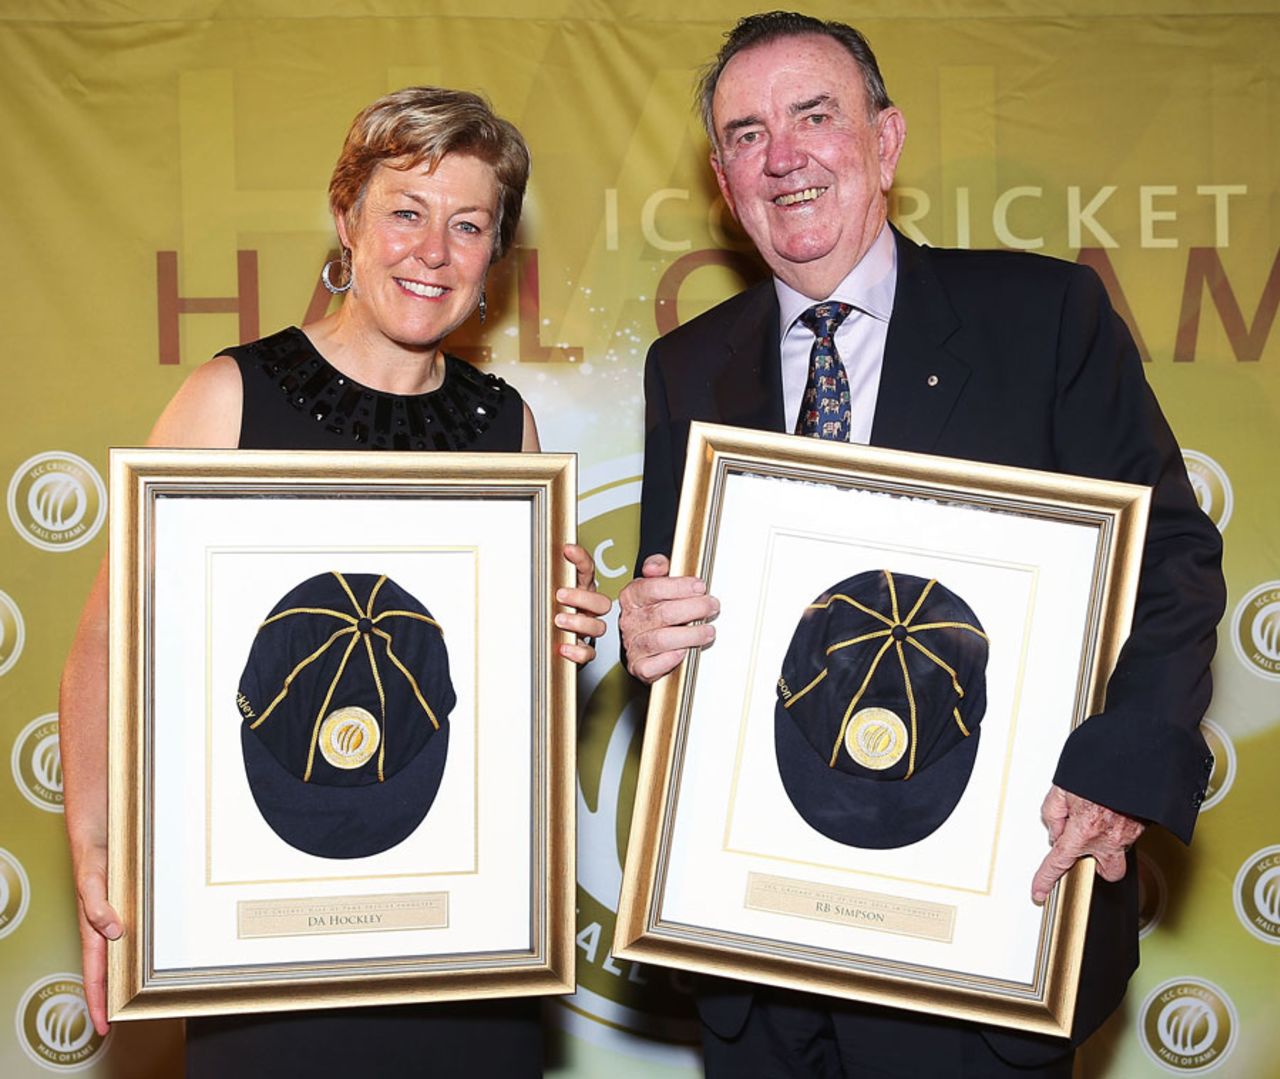 Debbie Hockley and Bob Simpson at the ICC's Hall of Fame Induction, Sydney, January 2, 2014